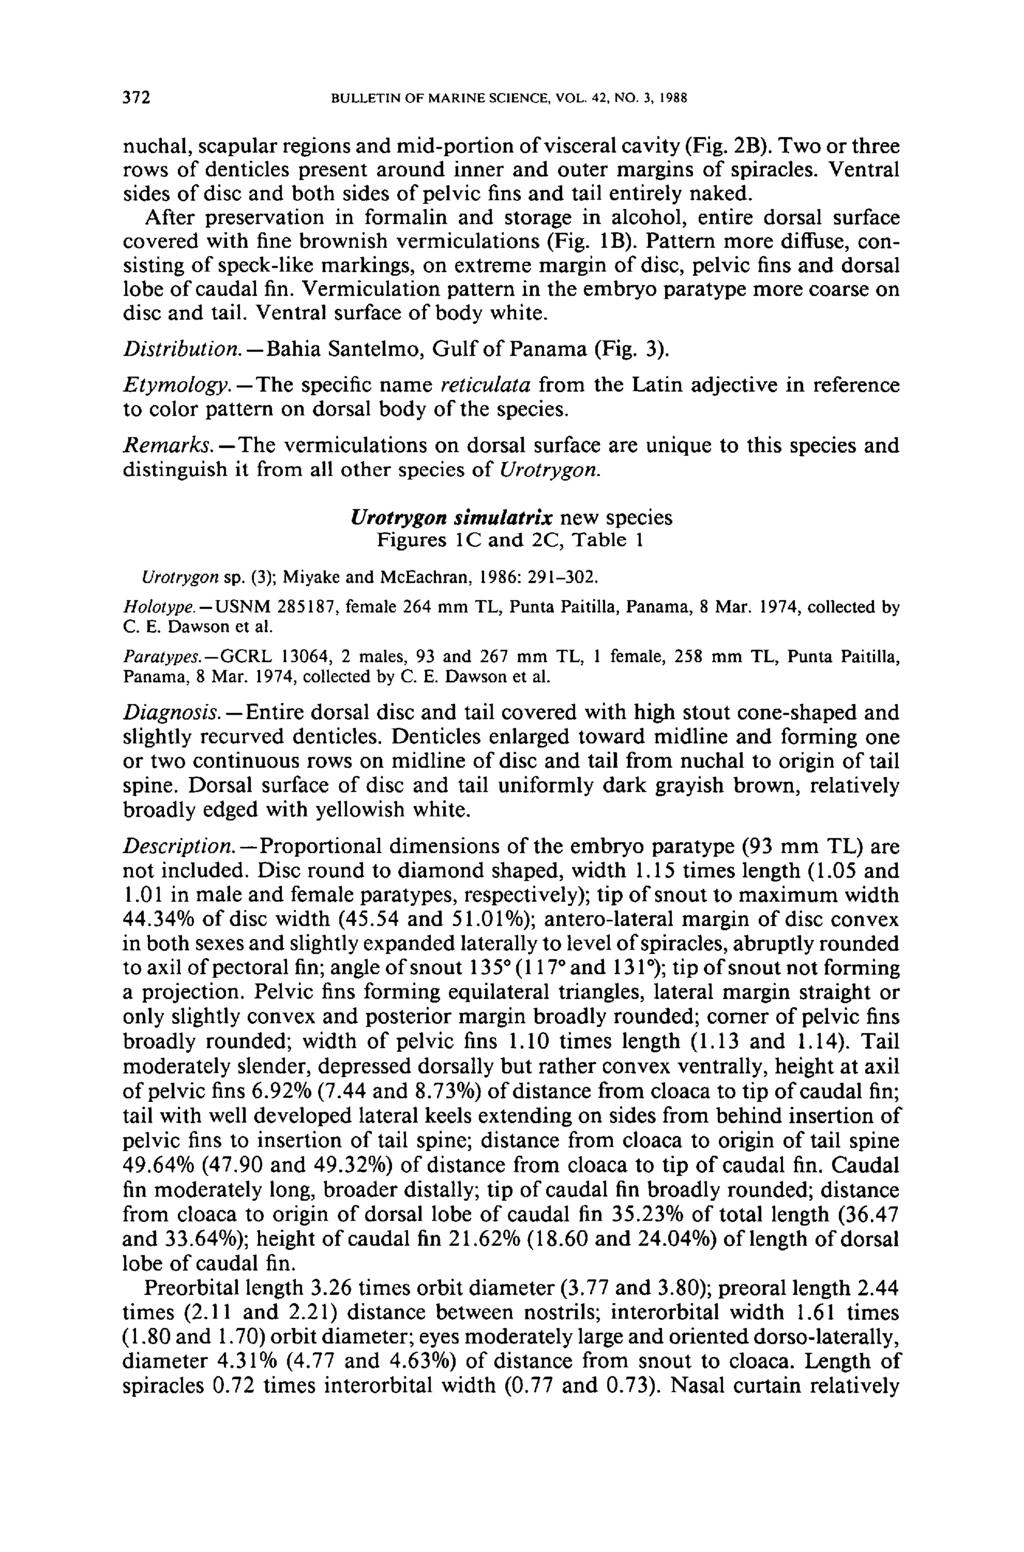 372 BULLETIN OF MARINE SCIENCE, VOL. 42, NO.3, 1988 nuchal, scapular regions and mid-portion of visceral cavity (Fig. 2B).